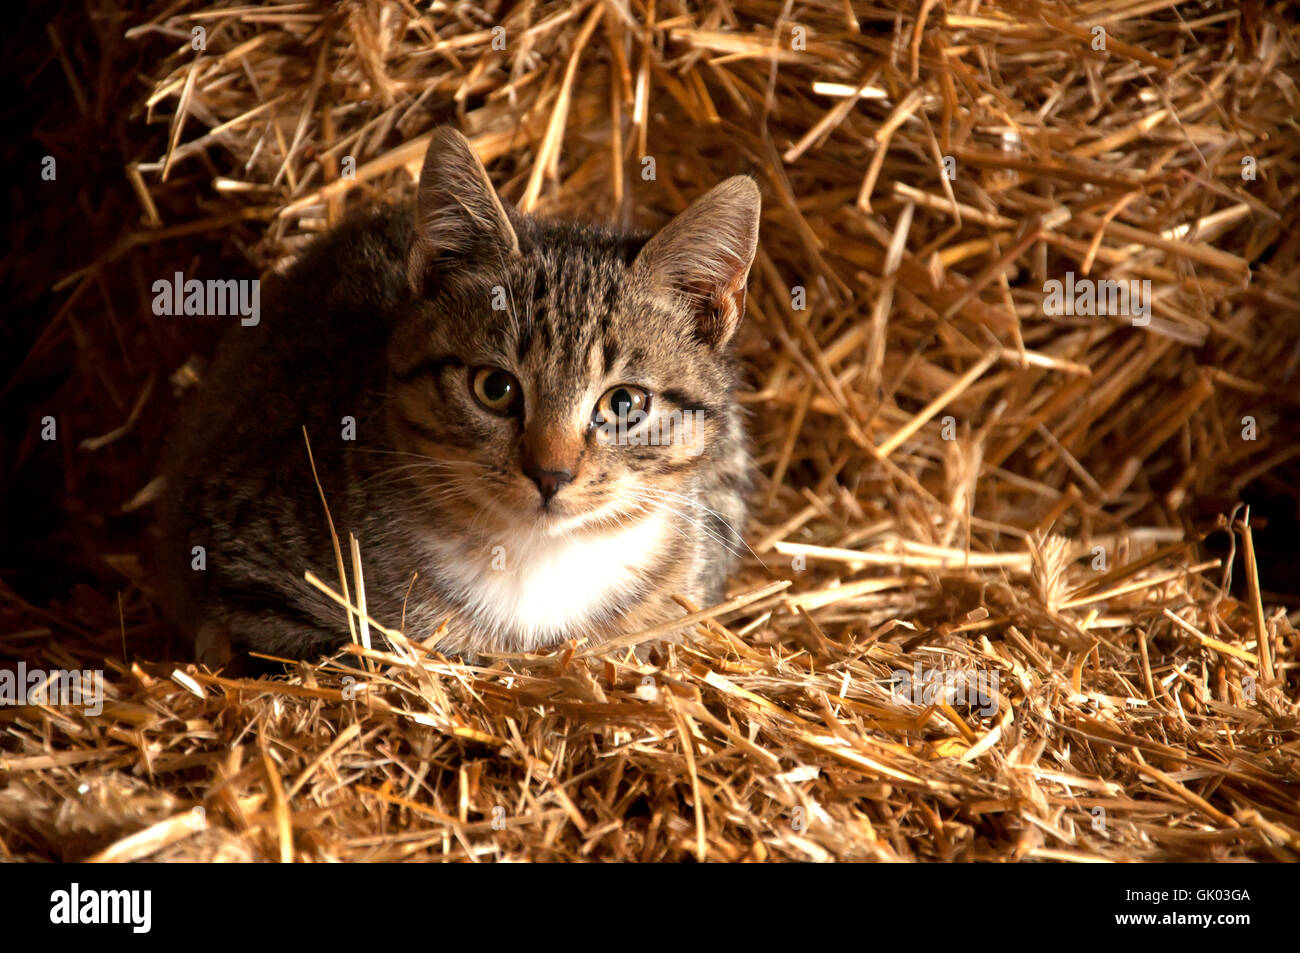 Young kitten into straw Stock Photo